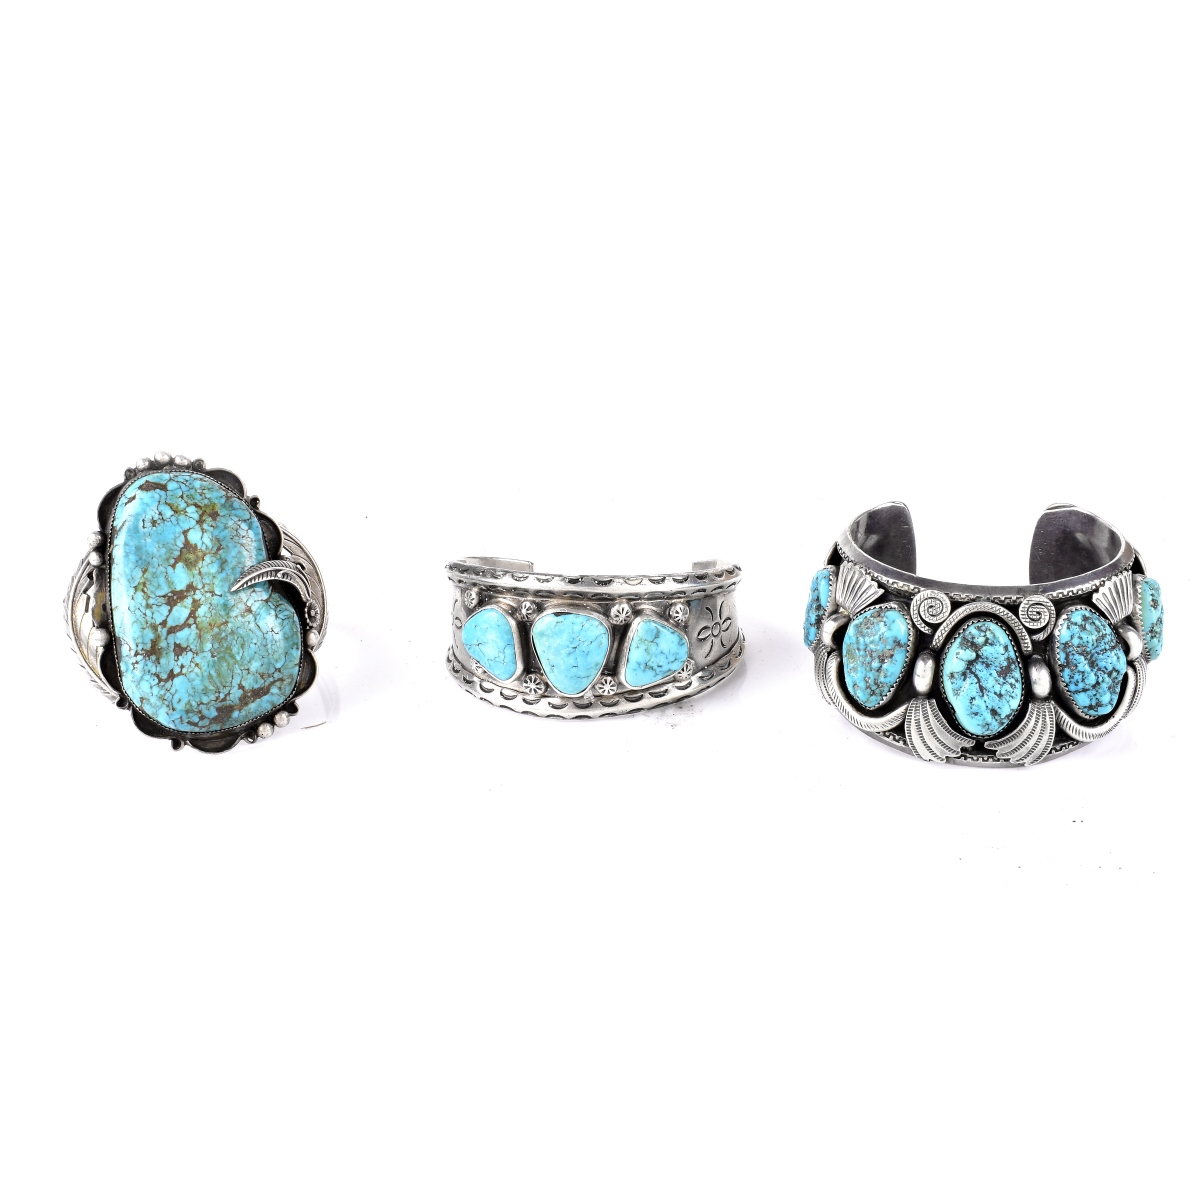 Three Silver and Turquoise Cuff Bracelets